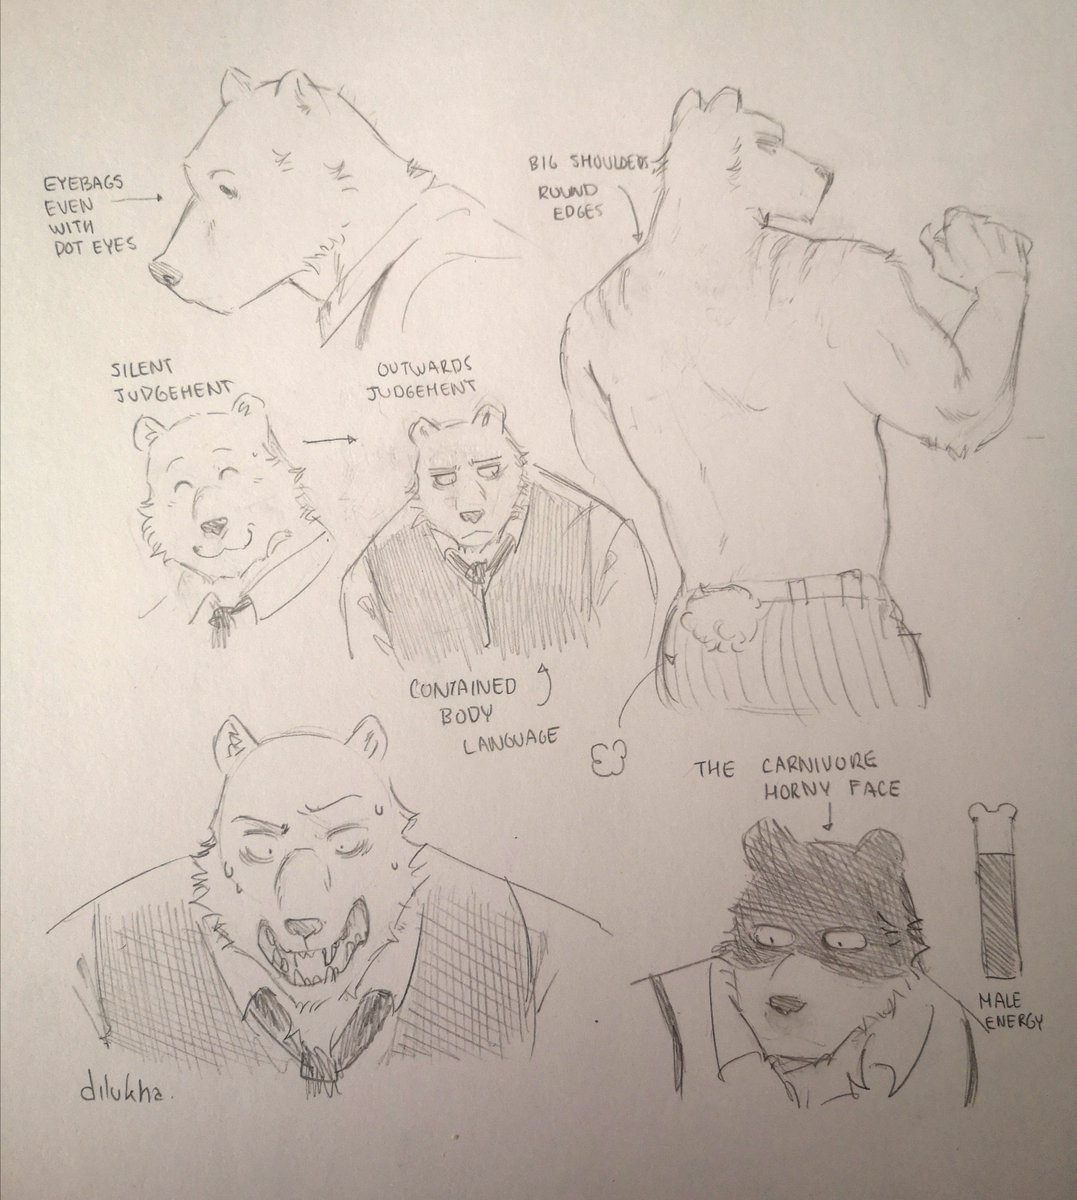 Riz / Pina doodle pages +notes bc i need to learn to draw them faster (unsuccesful so far)
#BEASTARS #beastarsfanart 